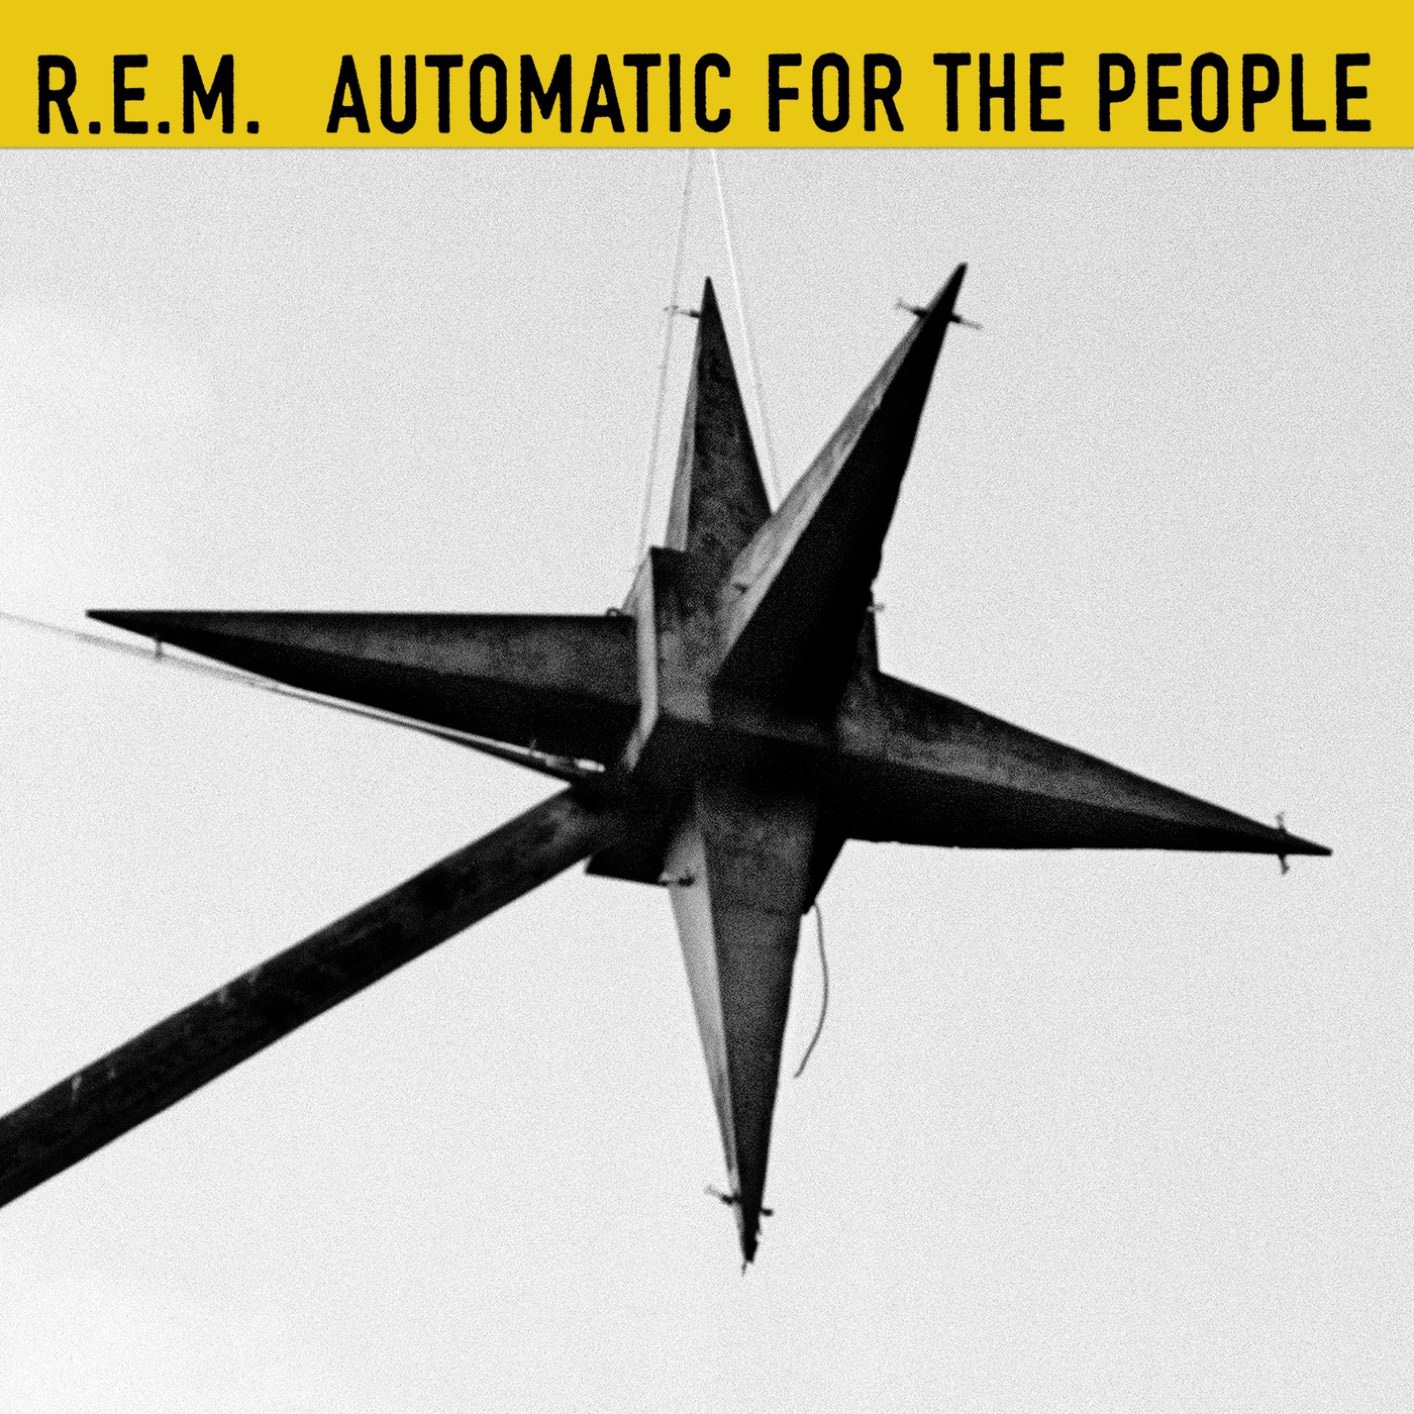 R.E.M. – Automatic For The People {25th Anniversary Edition} (1992/2017) [FLAC 24bit/96kHz]